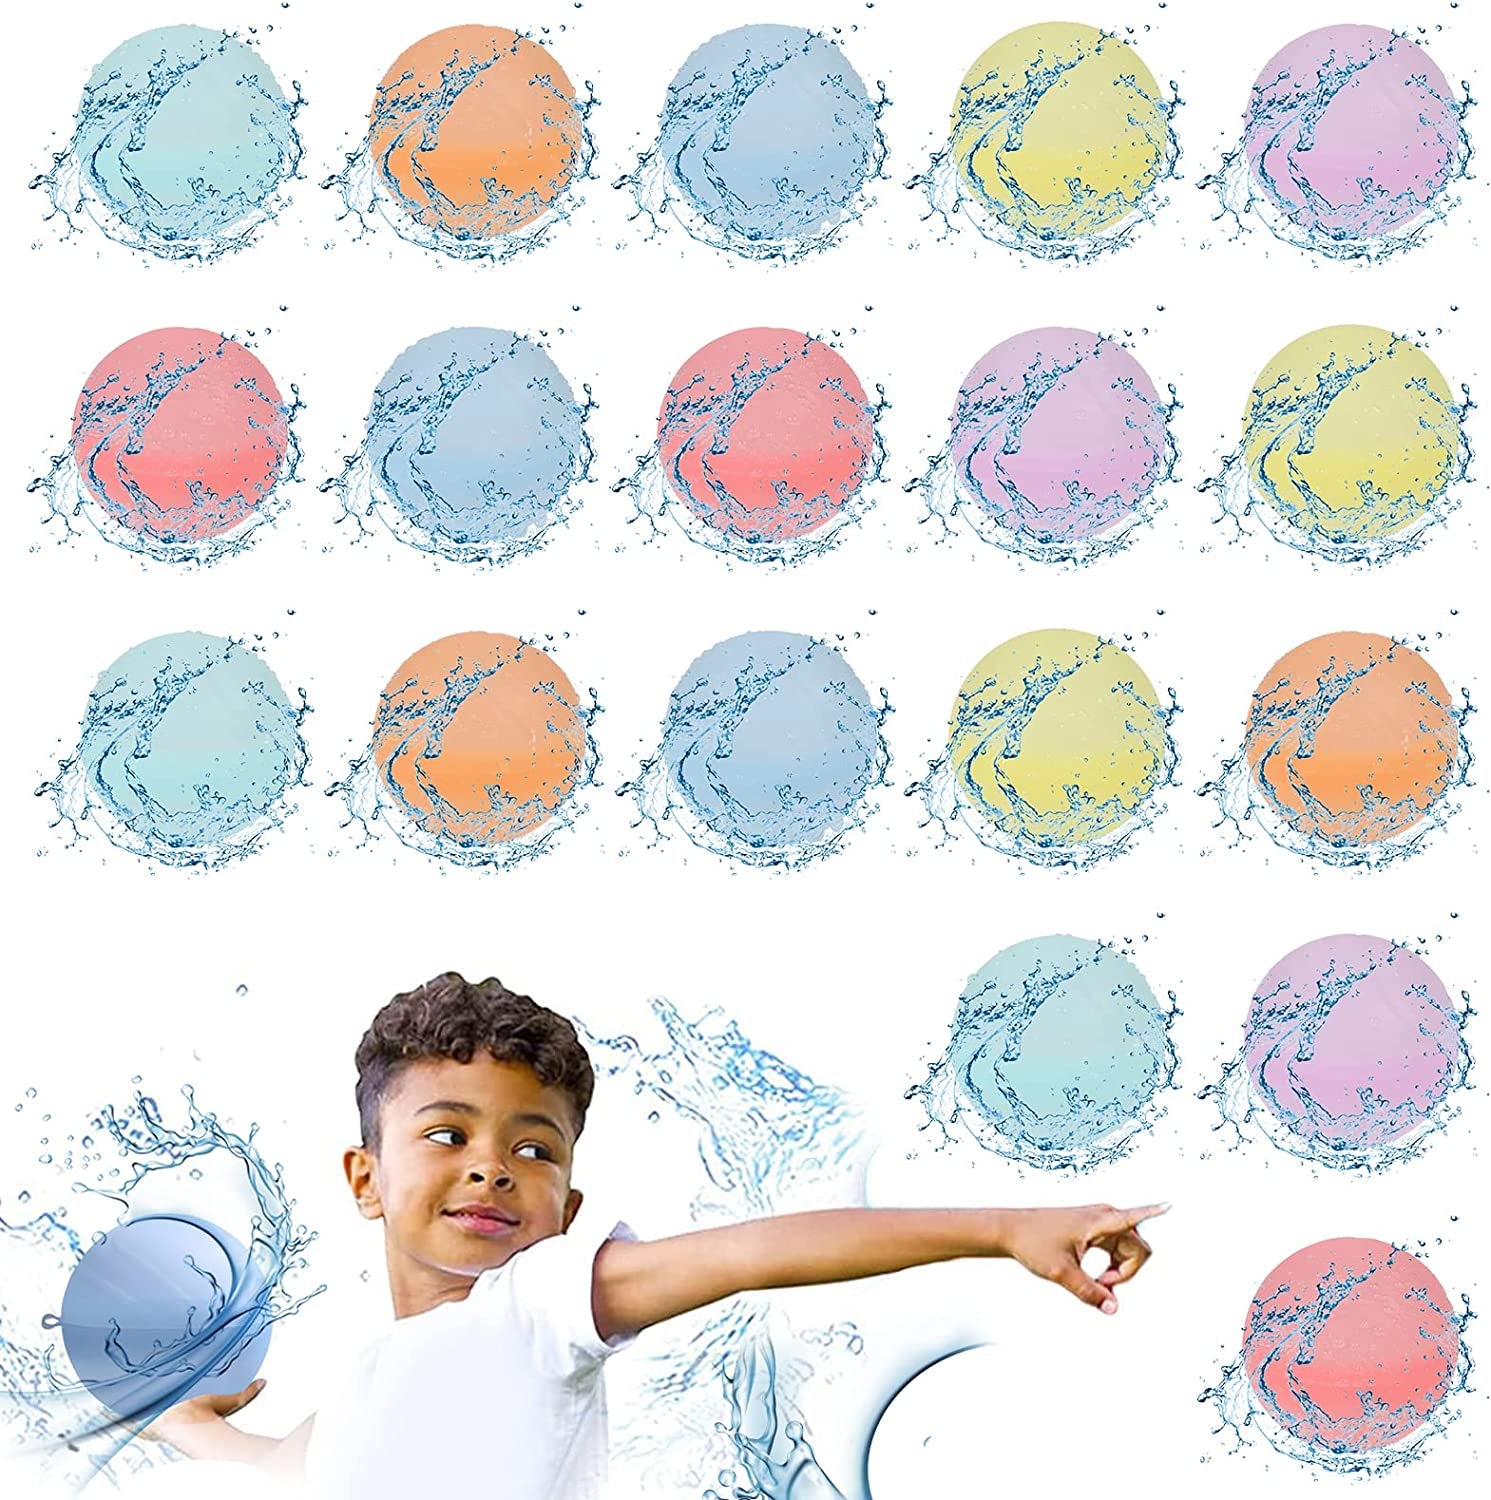 18 Reusable Water Balloons - Fast Fill, Easy Dry - Safe & Non-Toxic